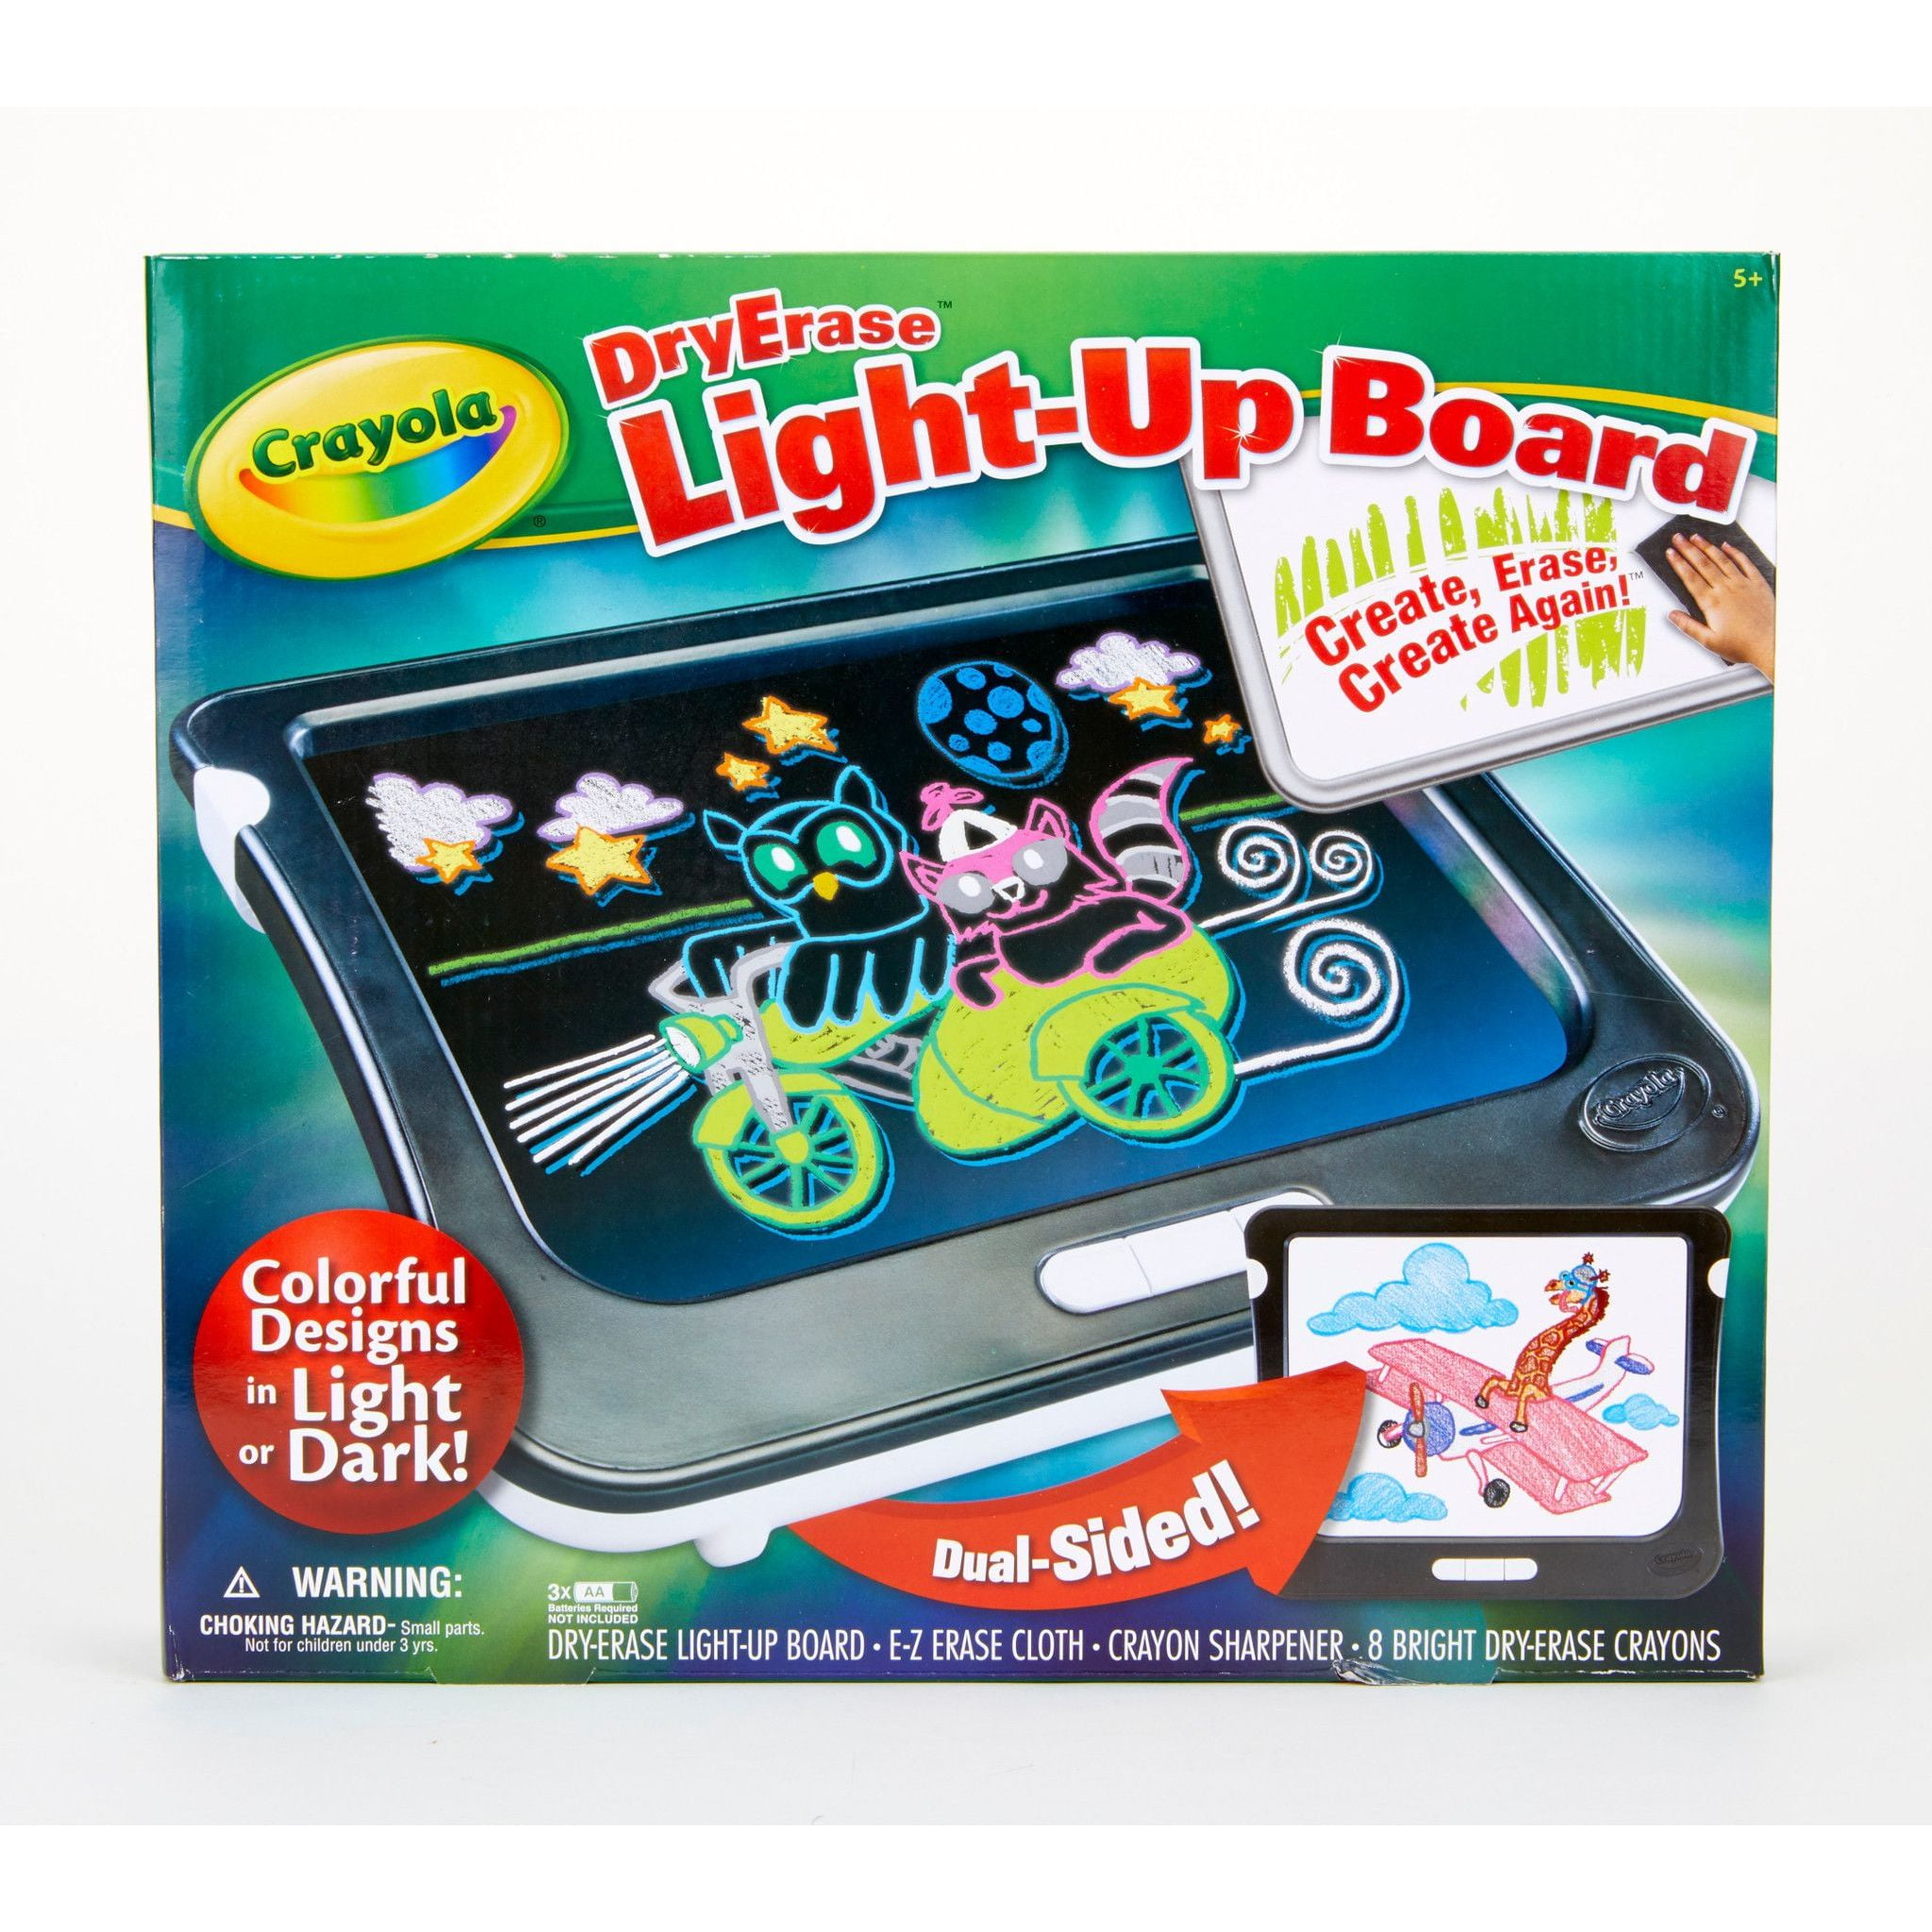 Crayola Dry Erase Light up Board, Art Tablet, Holiday Toys, Gifts for Girls & Boys, Child